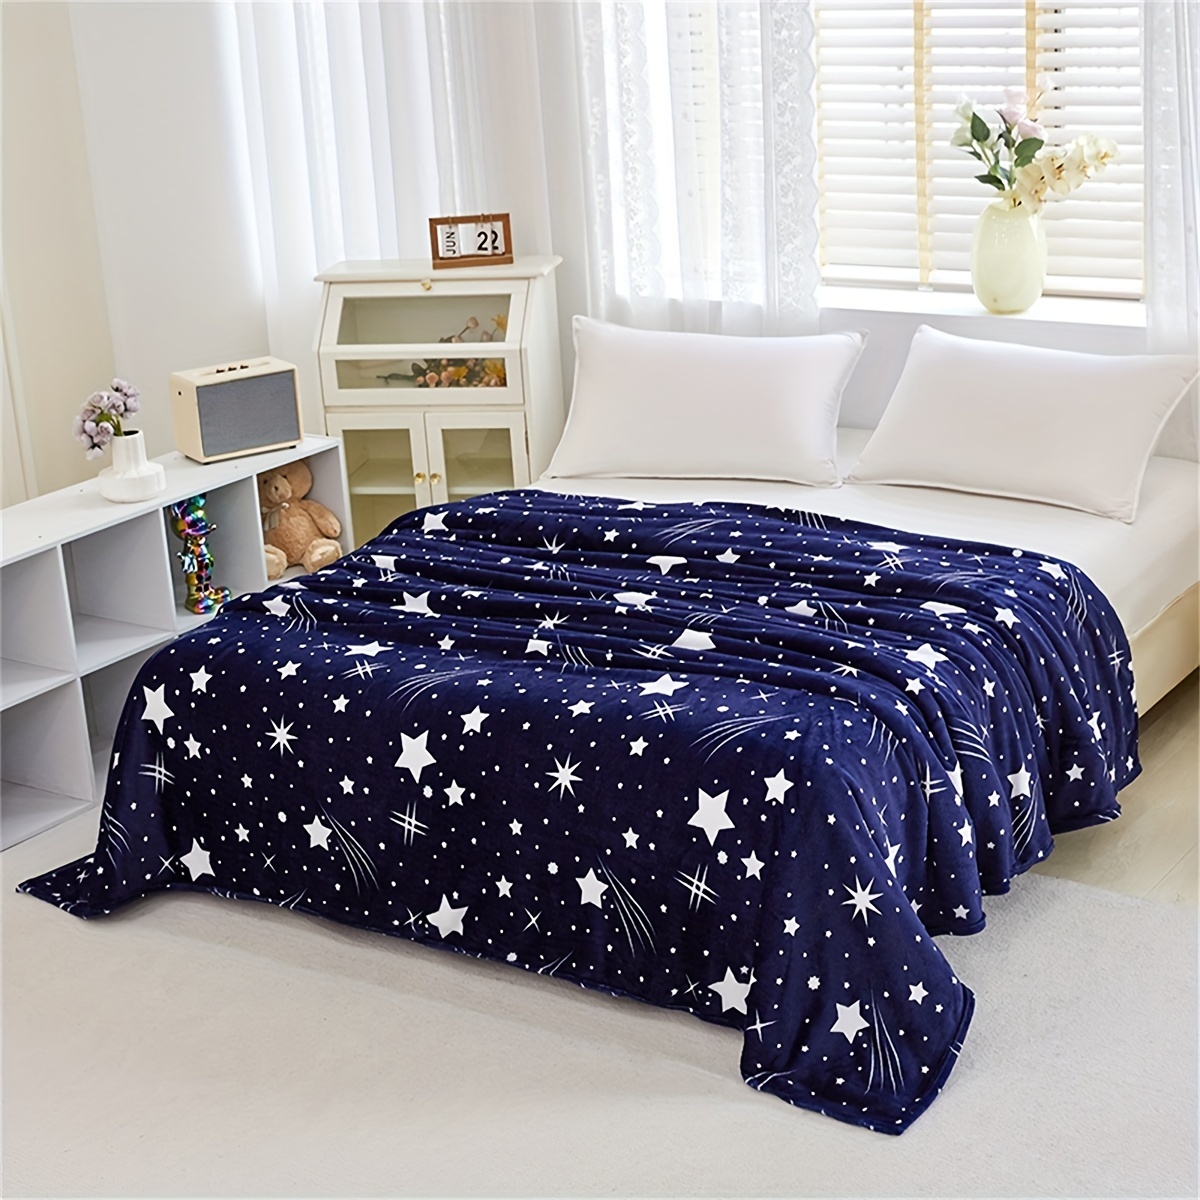 

1pc Meteor Pattern Bed Blanket, Soft Warm Throw Blanket Nap Blanket For Couch Sofa Office Bed Camping Travel, Multi-purpose Gift Blanket For All Season